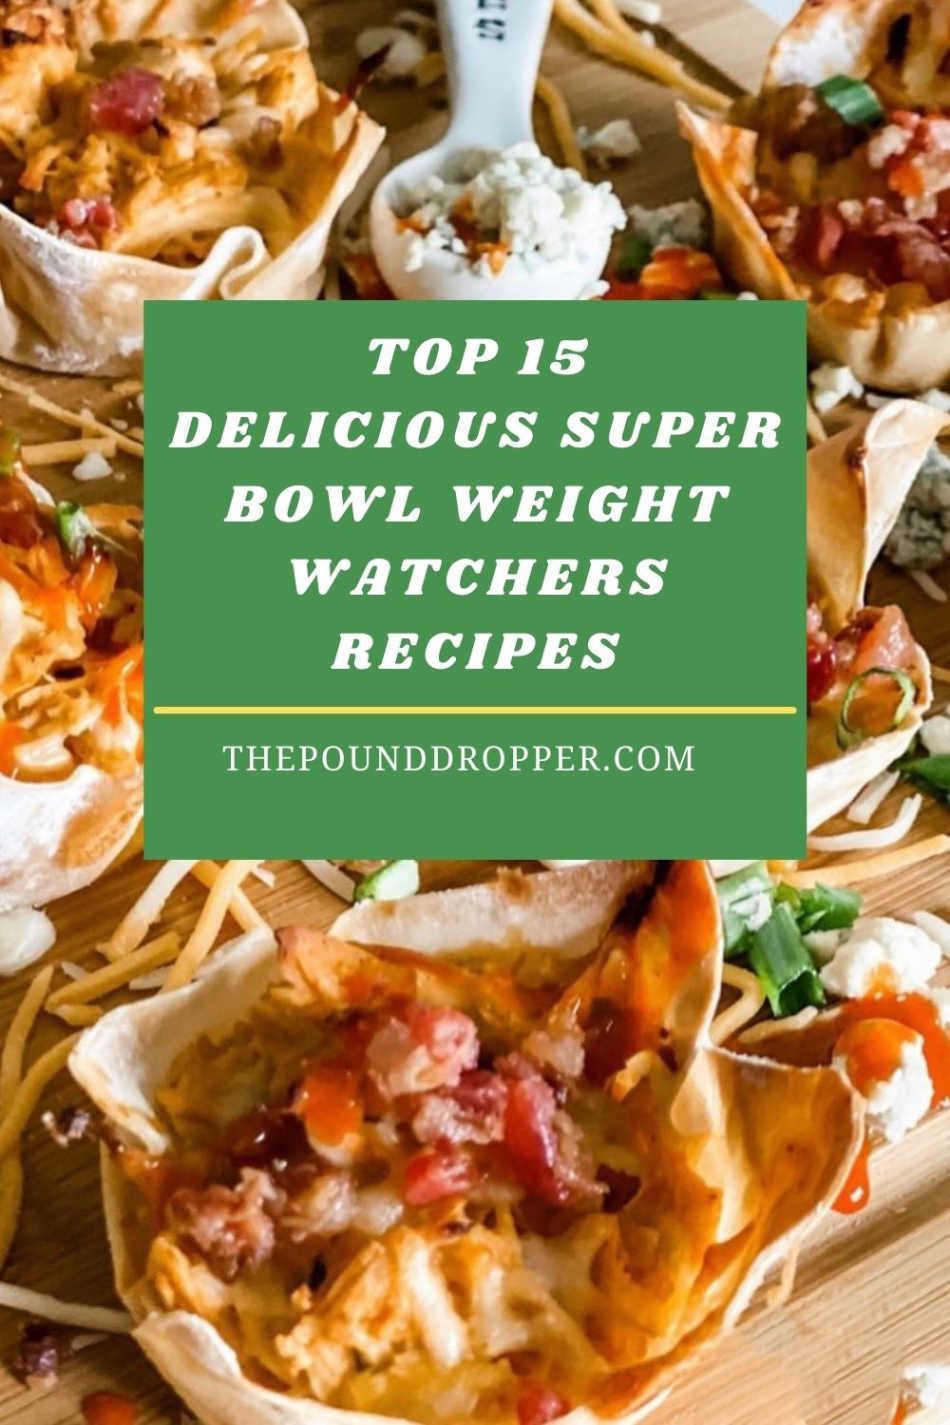 Weight Watchers Super Bowl Recipes via @pounddropper